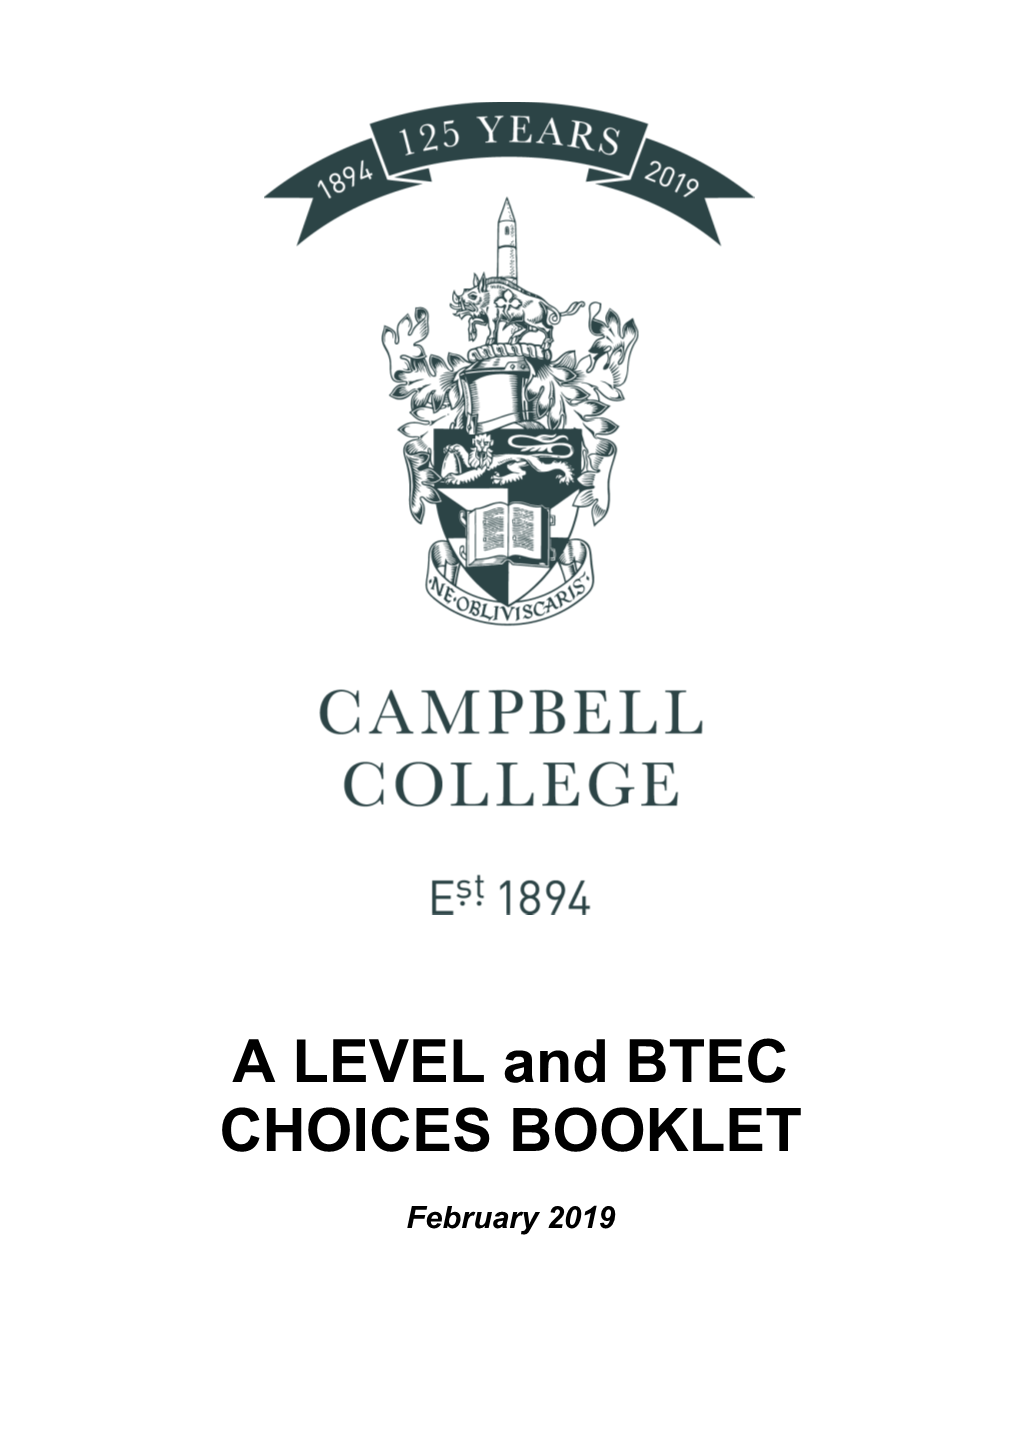 A LEVEL and BTEC CHOICES BOOKLET